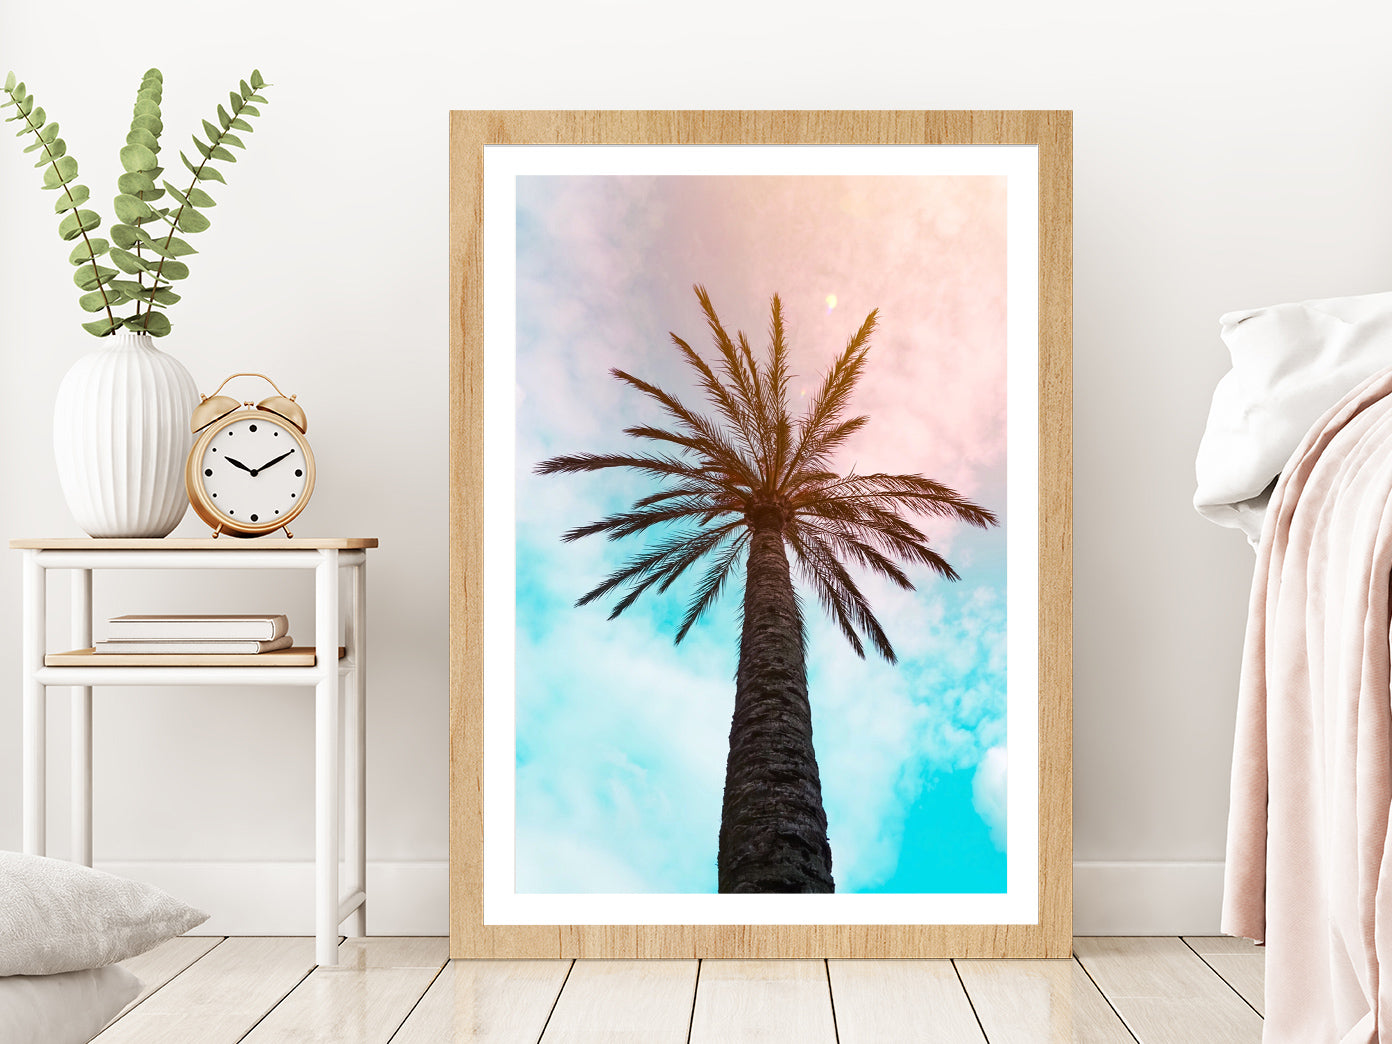 Palm Trees & Blue Pink Sky Scenery Photograph Glass Framed Wall Art, Ready to Hang Quality Print With White Border Oak